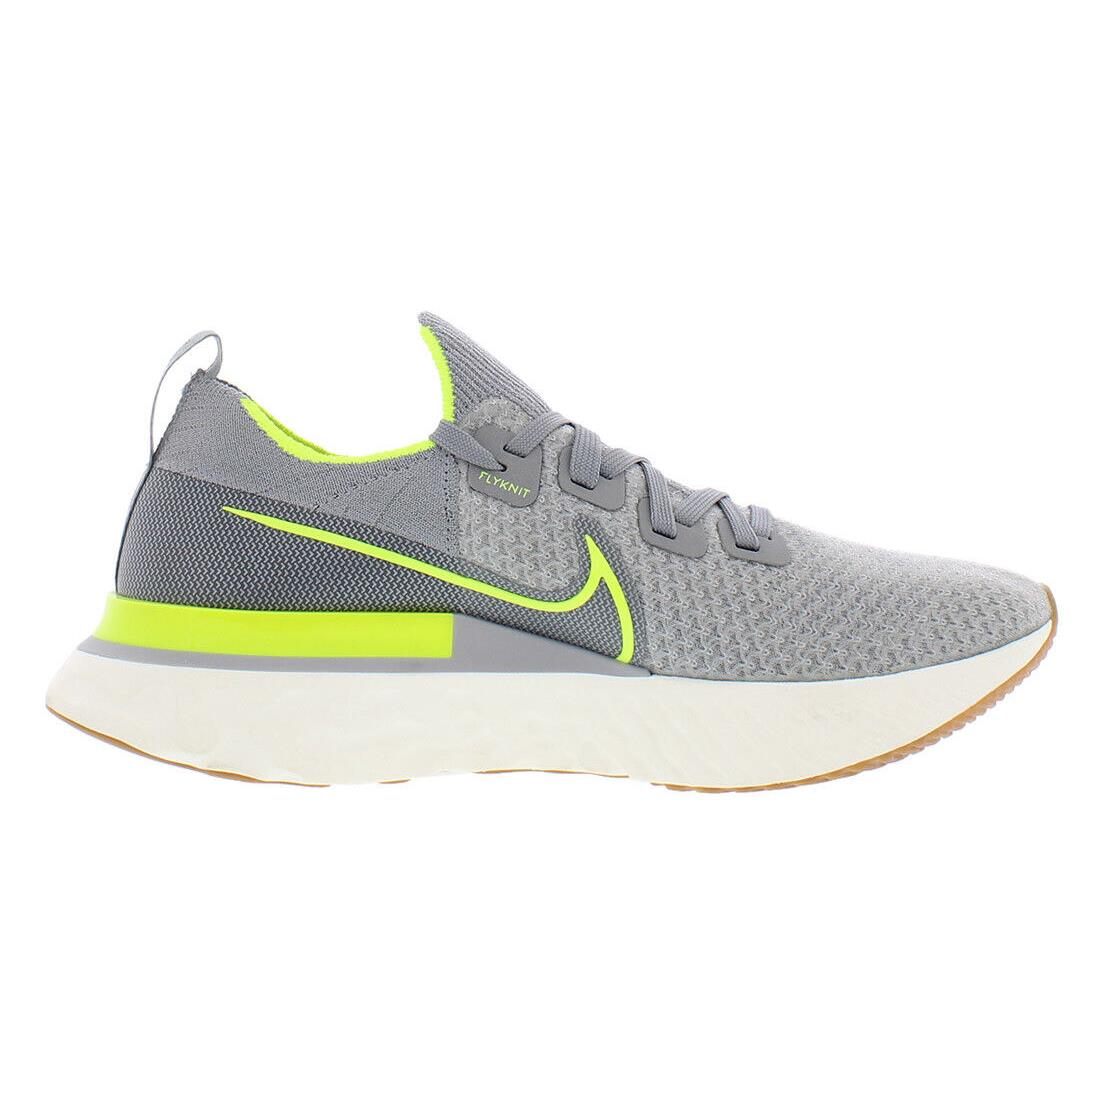 Nike React Infinity Run Fk Mens Shoes Size 8 Color: Particle Grey/volt/wolf - Gray, Full: Particle Grey/Volt/Wolf Grey